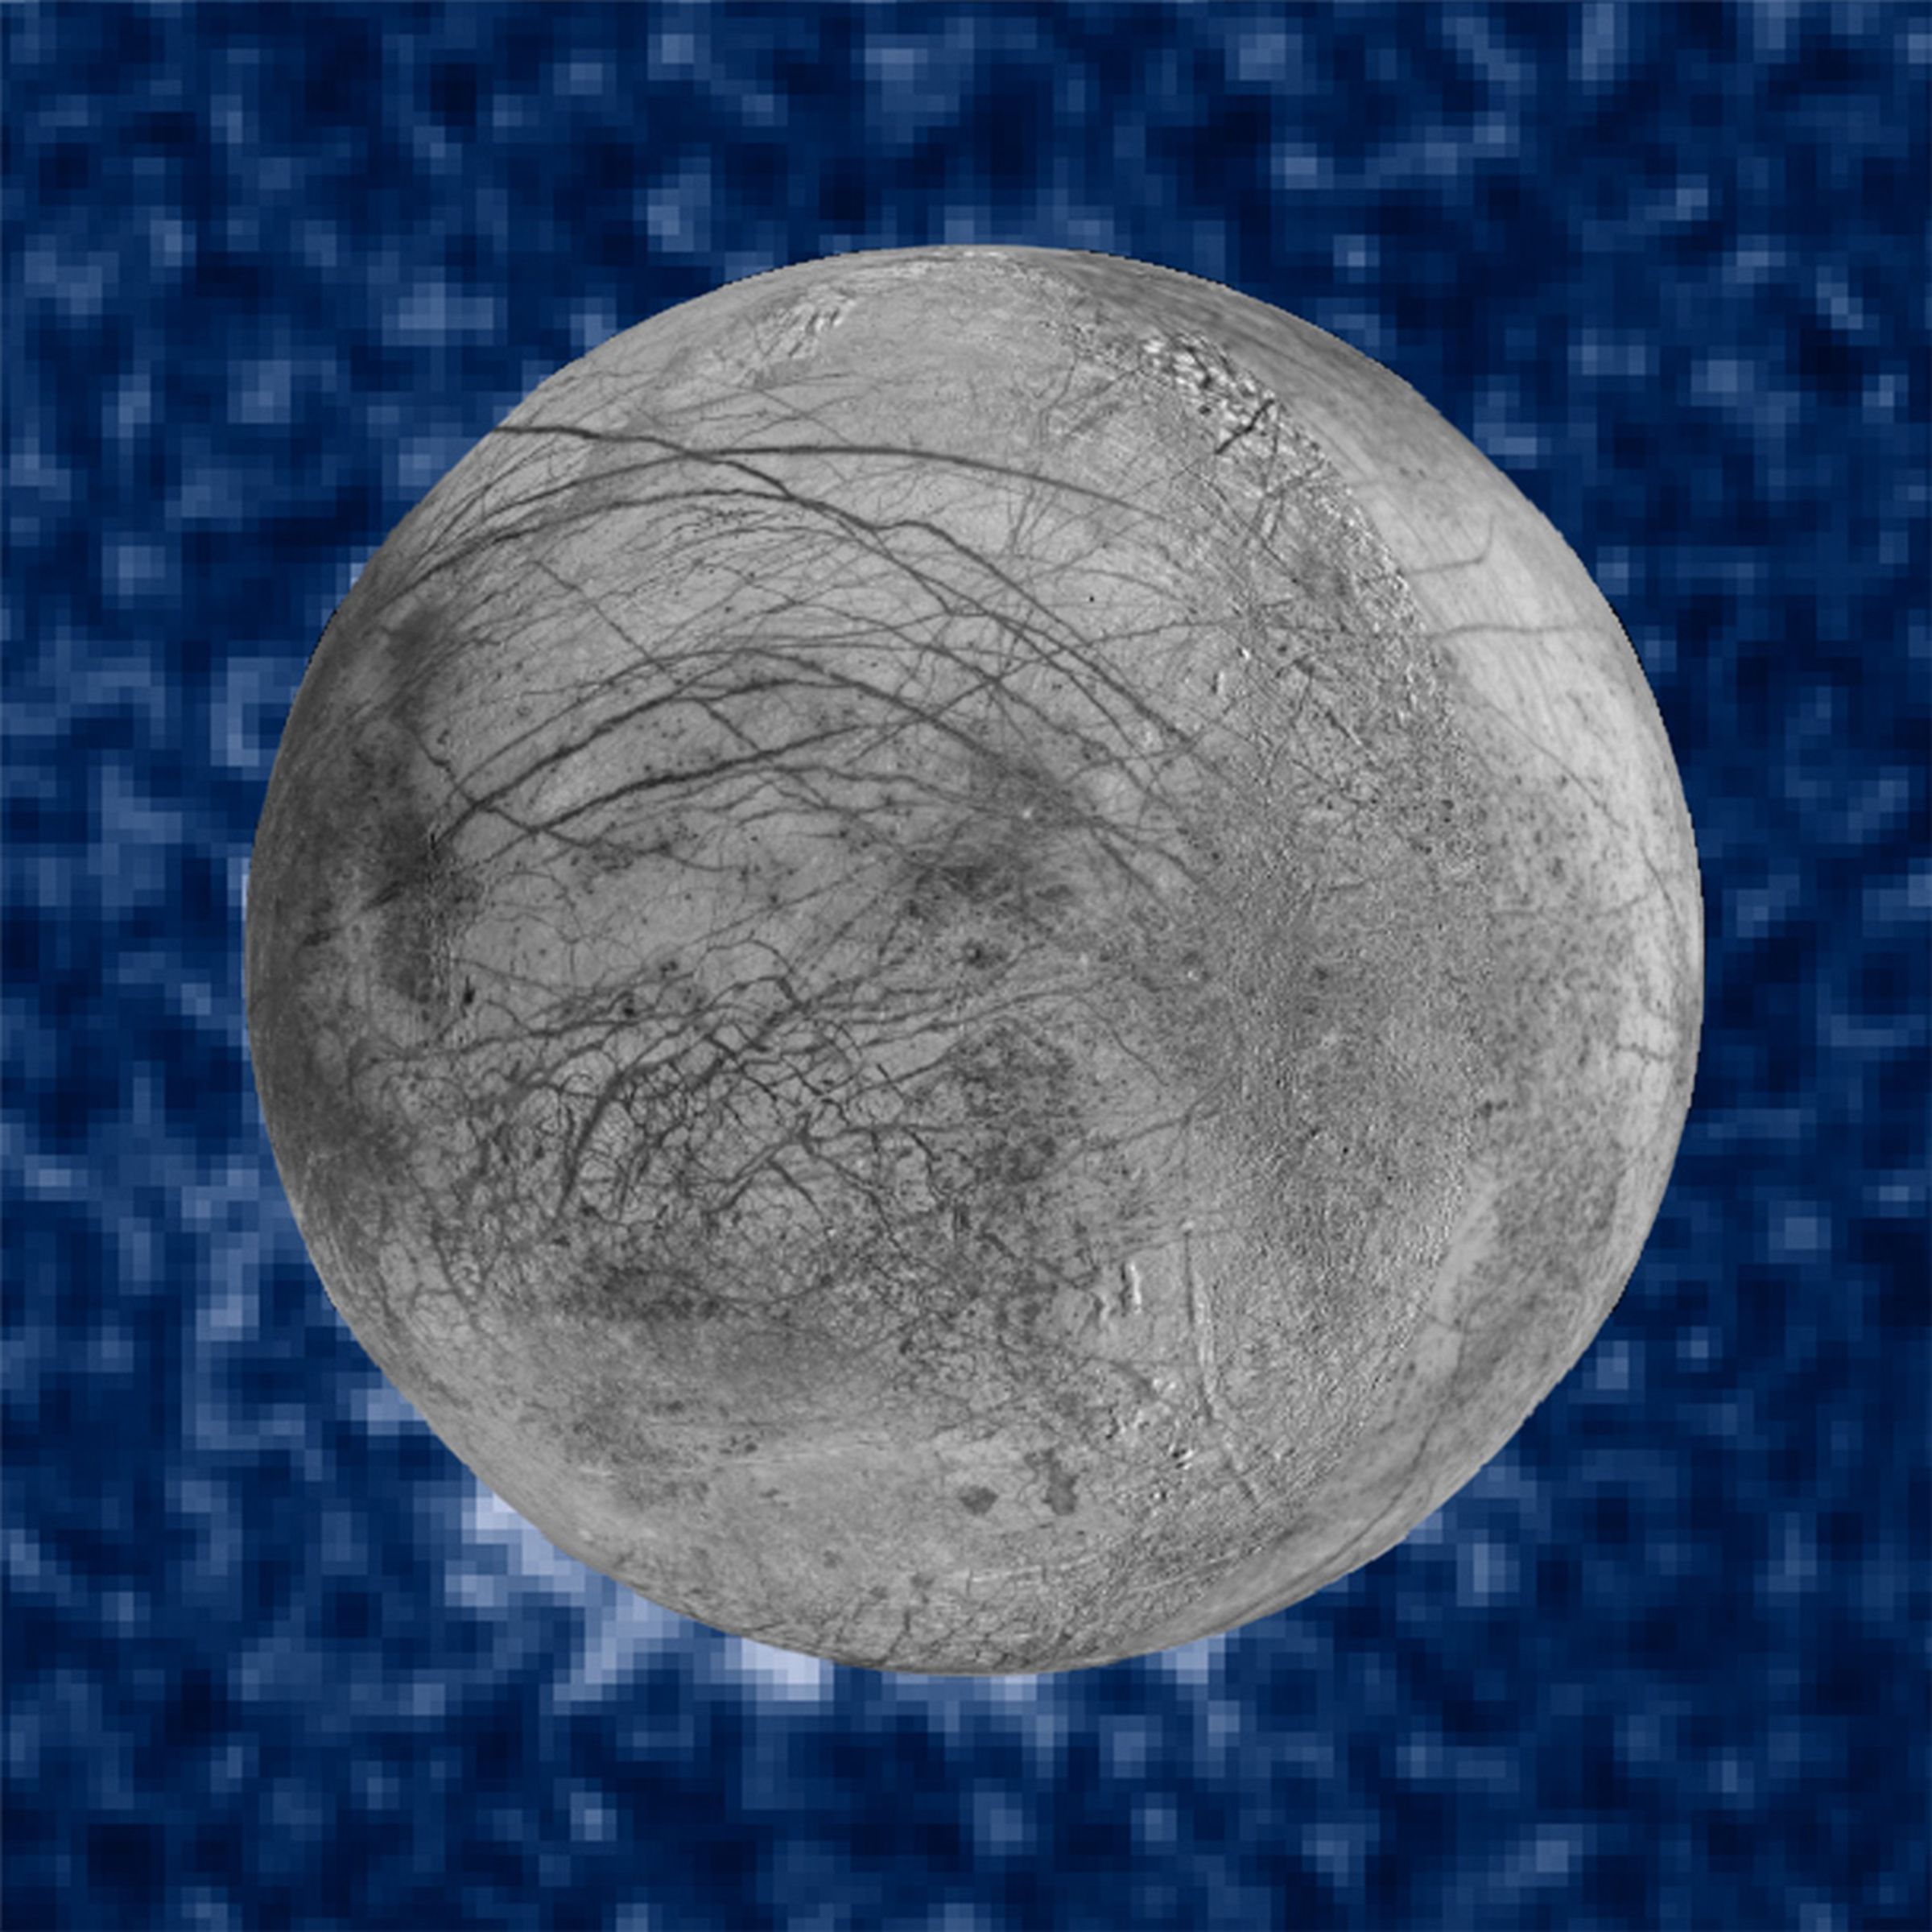 A composite image of plumes on Europa, using pictures from NASA’s Hubble Space Telescope, Galileo, and Voyager. Water can be seen venting in the lower lefthand side of the moon